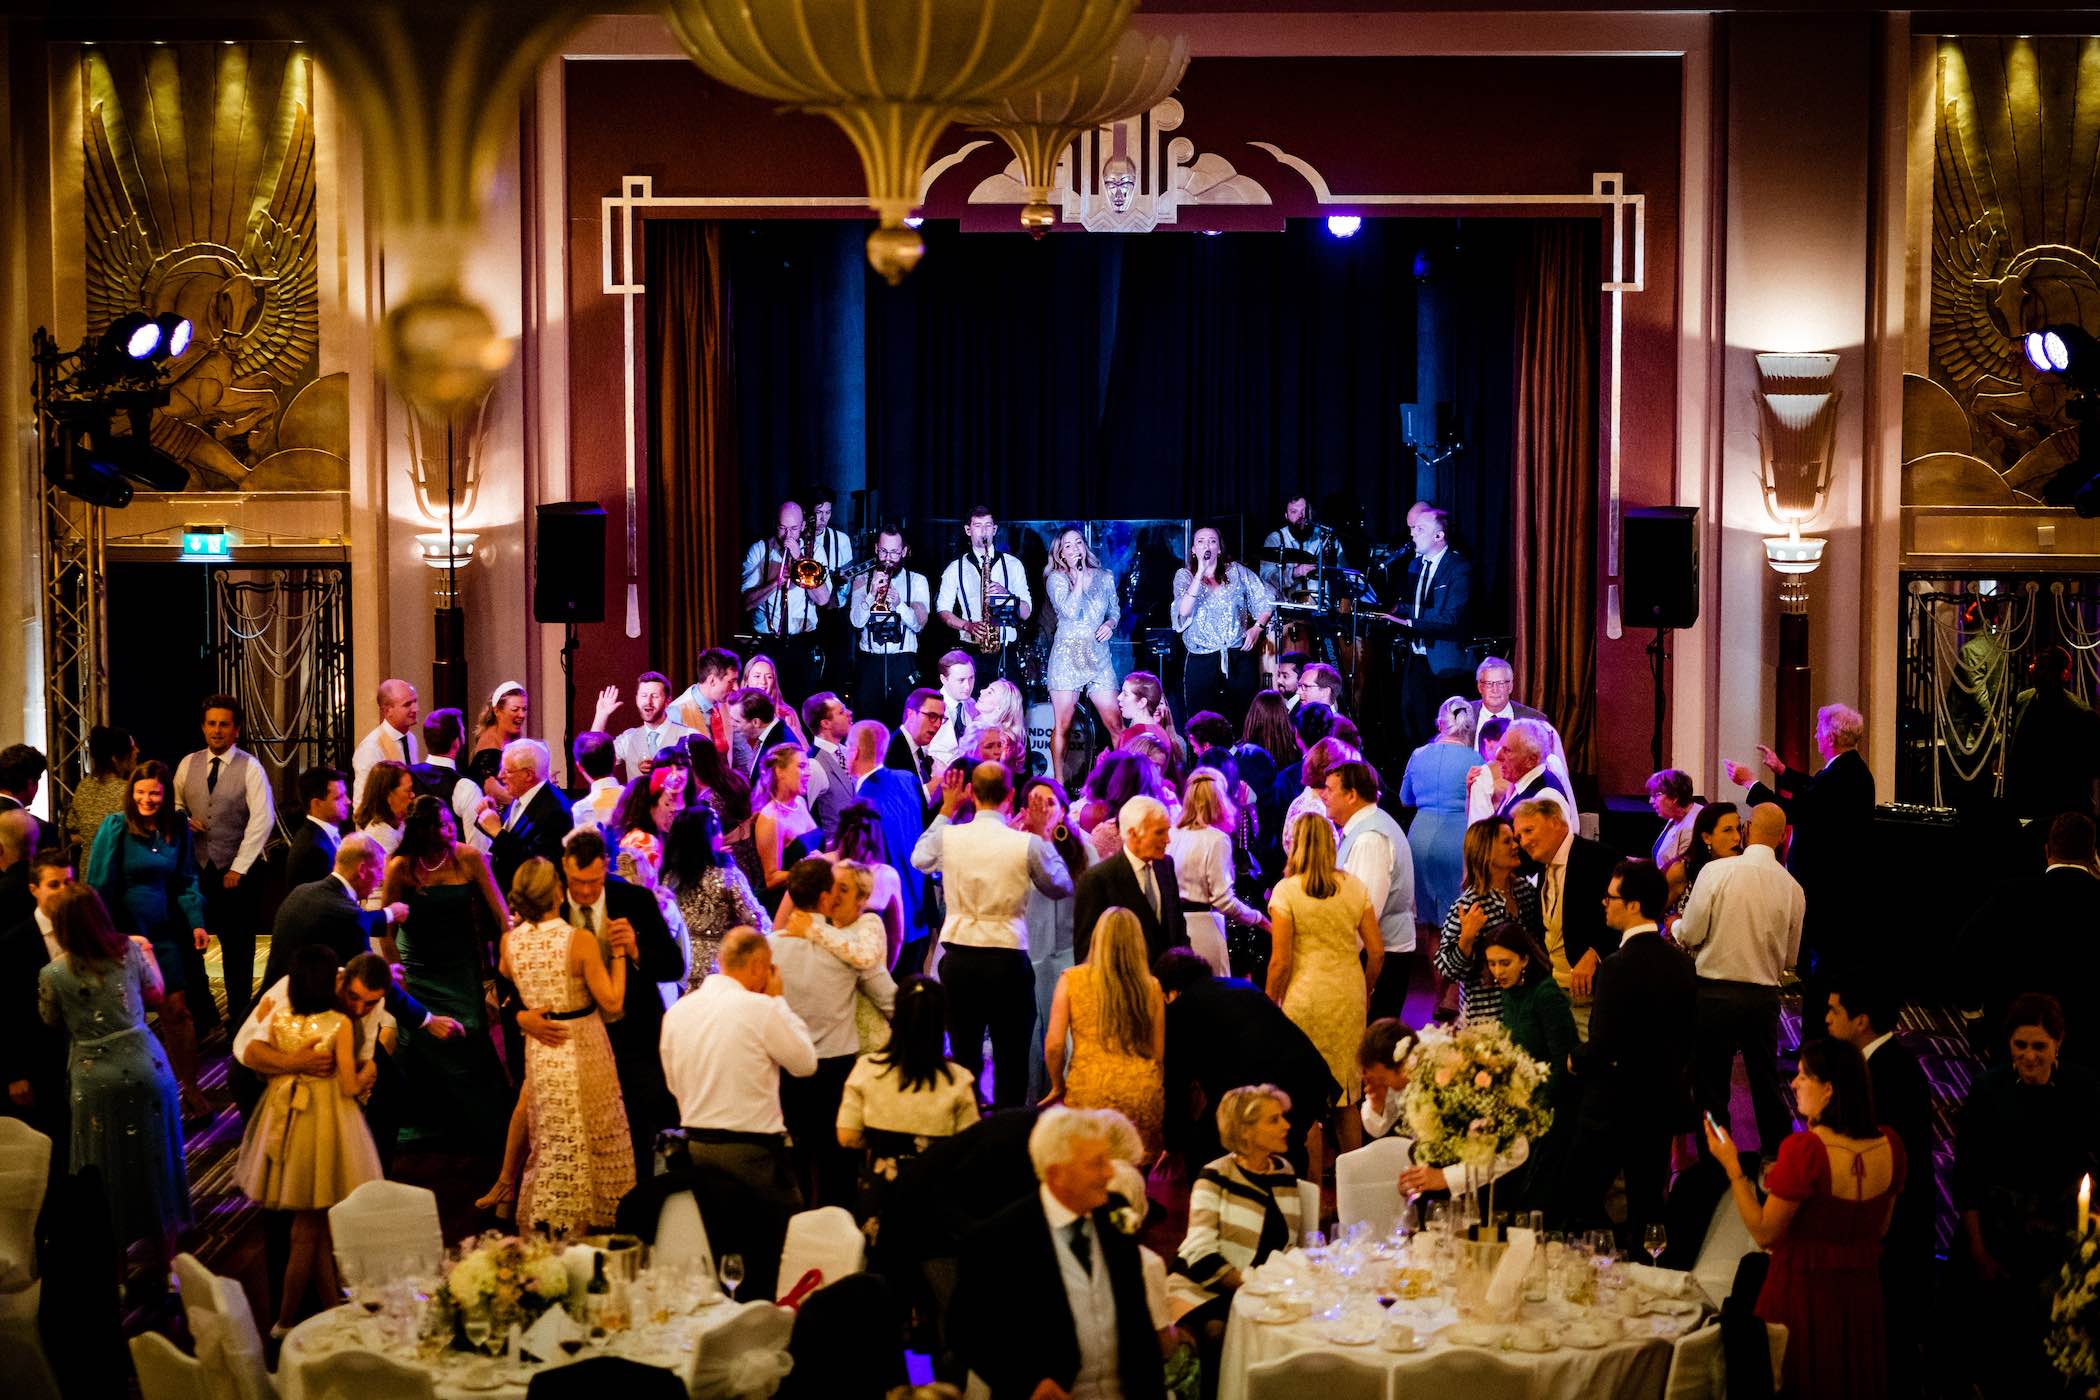 Pro Live Sound for weddings, events and concerts